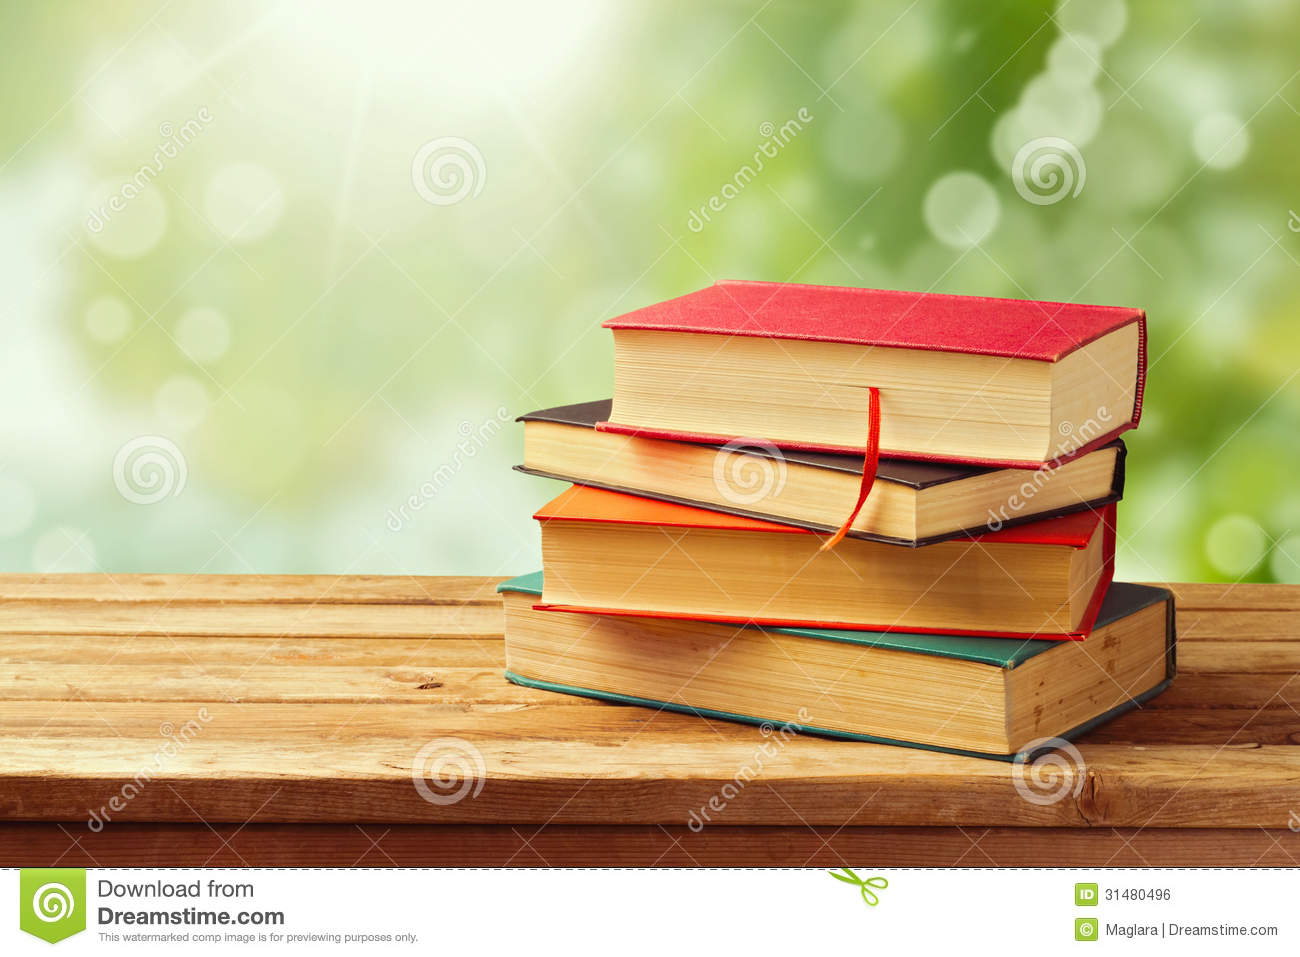 Background images books